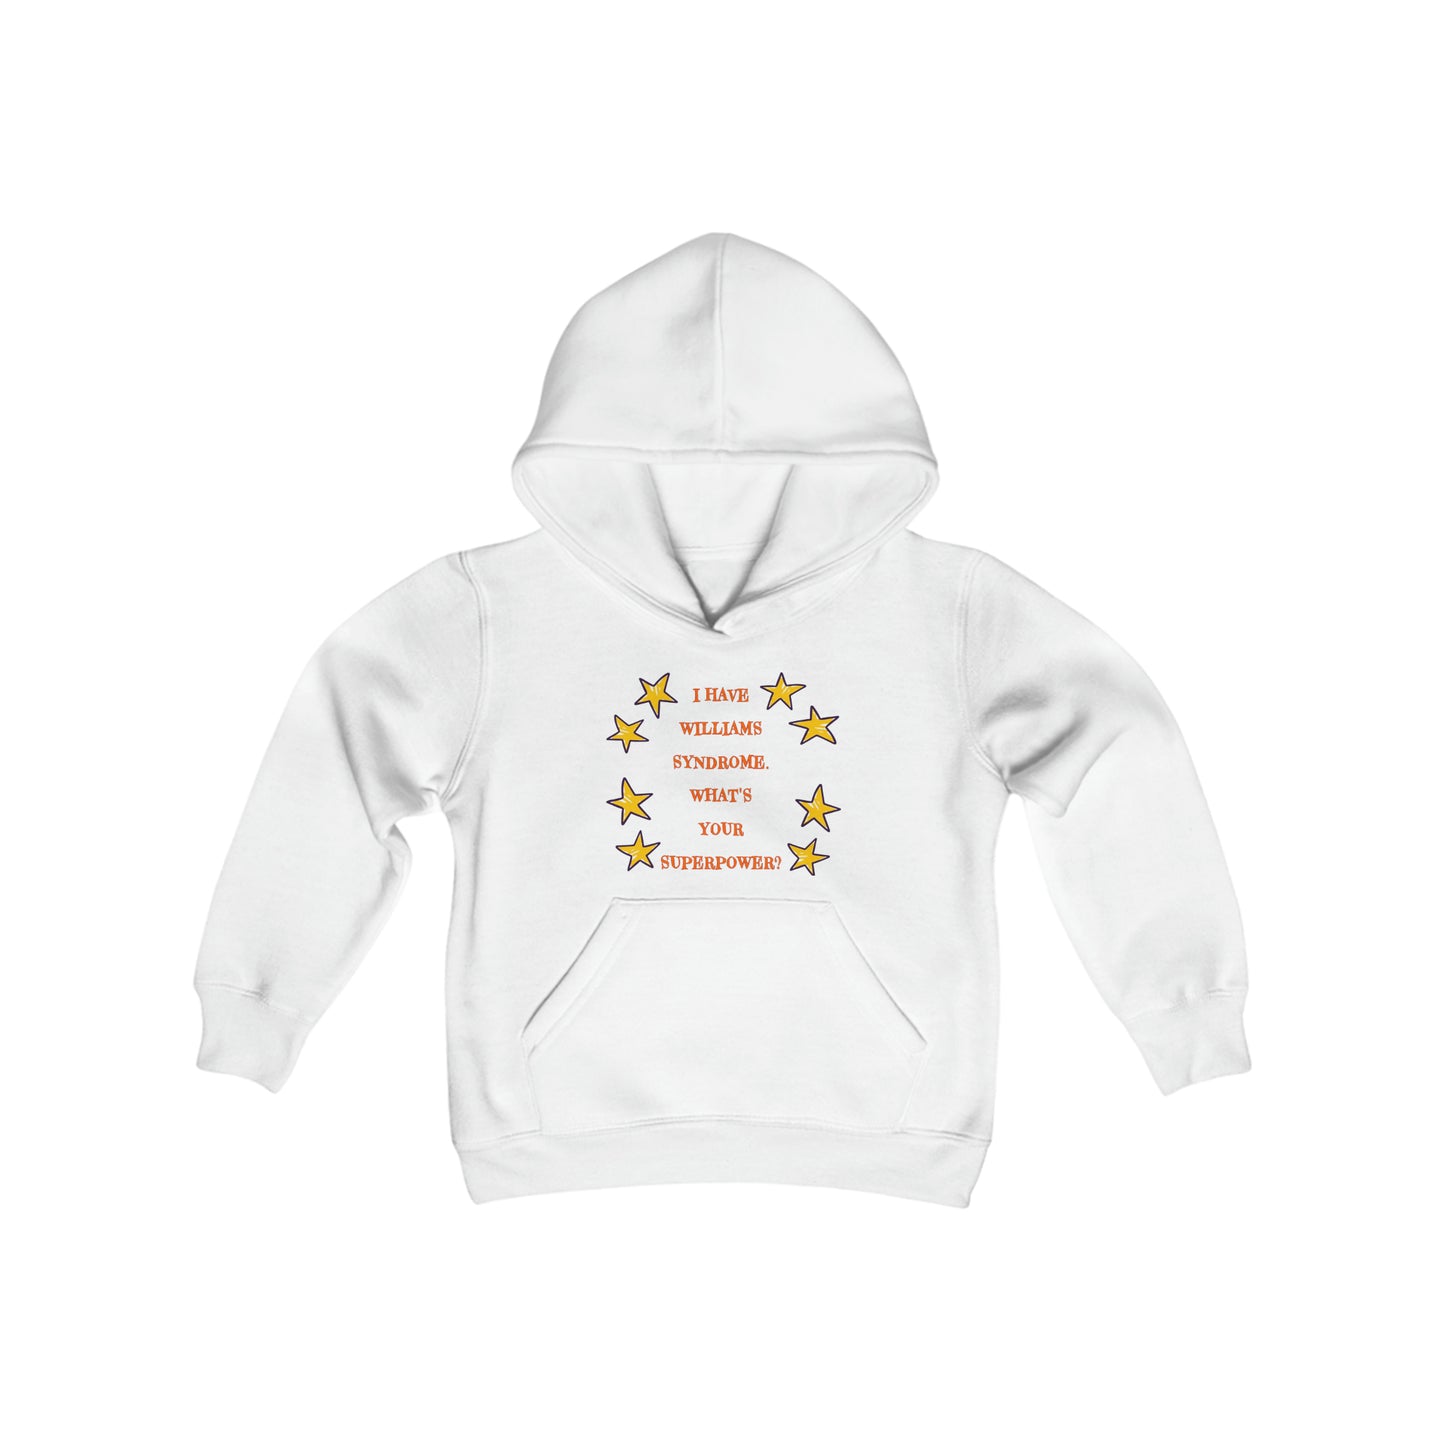 Williams Syndrome Superpower - Youth Heavy Blend Hooded Sweatshirt